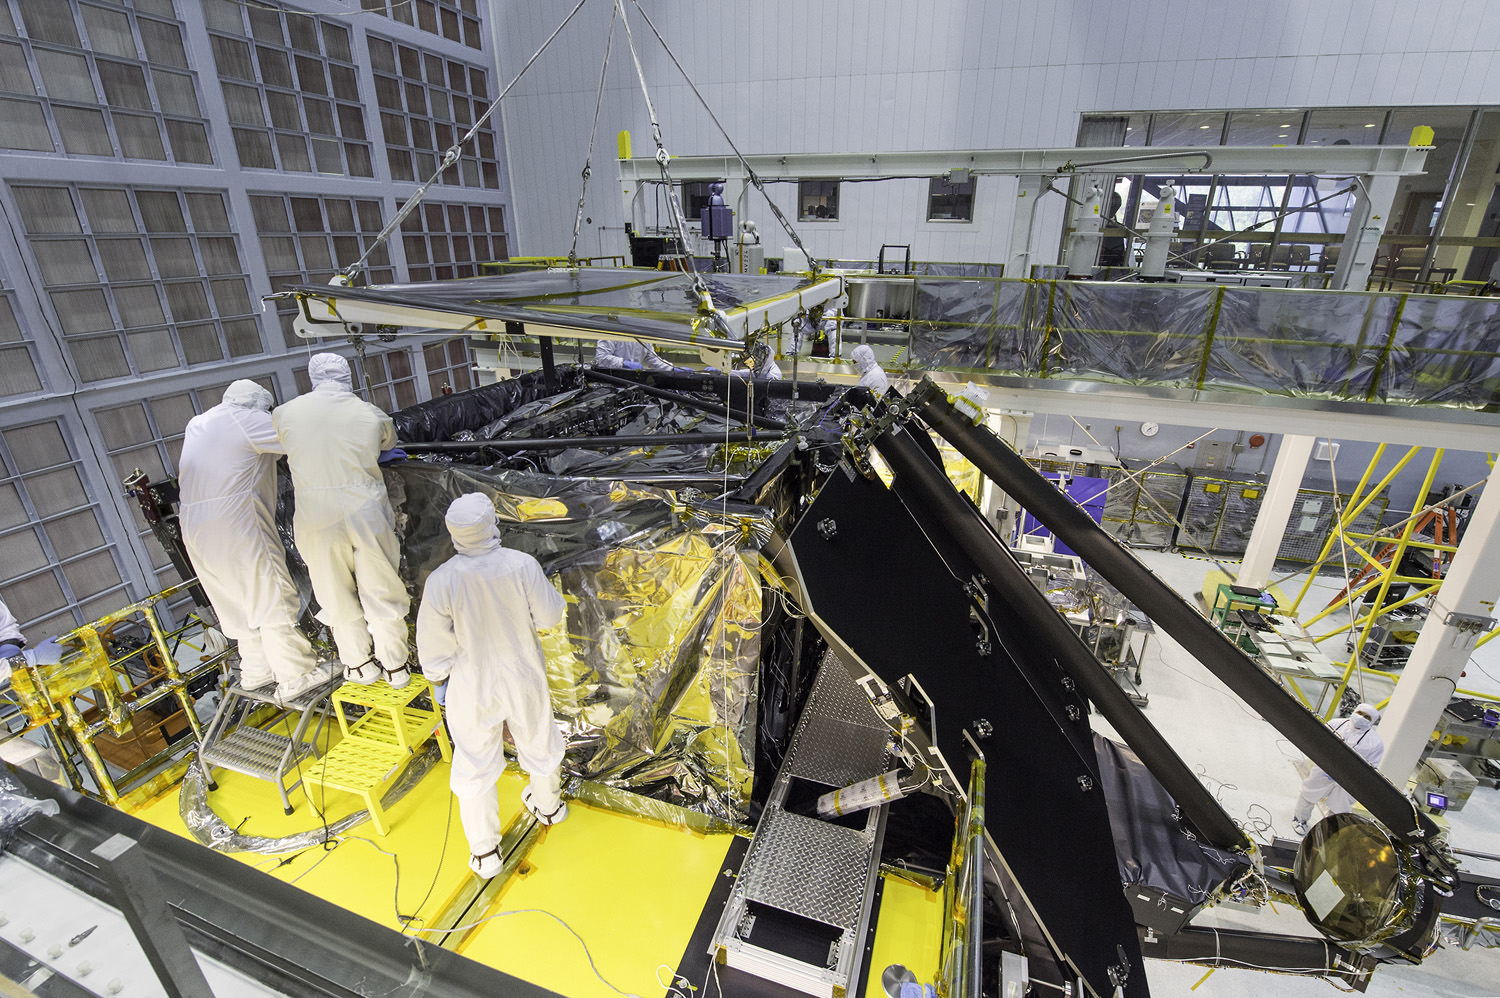 This side shot shows a glimpse inside a massive clean room at NASA's Goddard Space Flight Center in Greenbelt, Maryland where the James Webb Space Telescope team worked meticulously to complete the science instrument package installation.  Credits: NASA/Desiree Stover